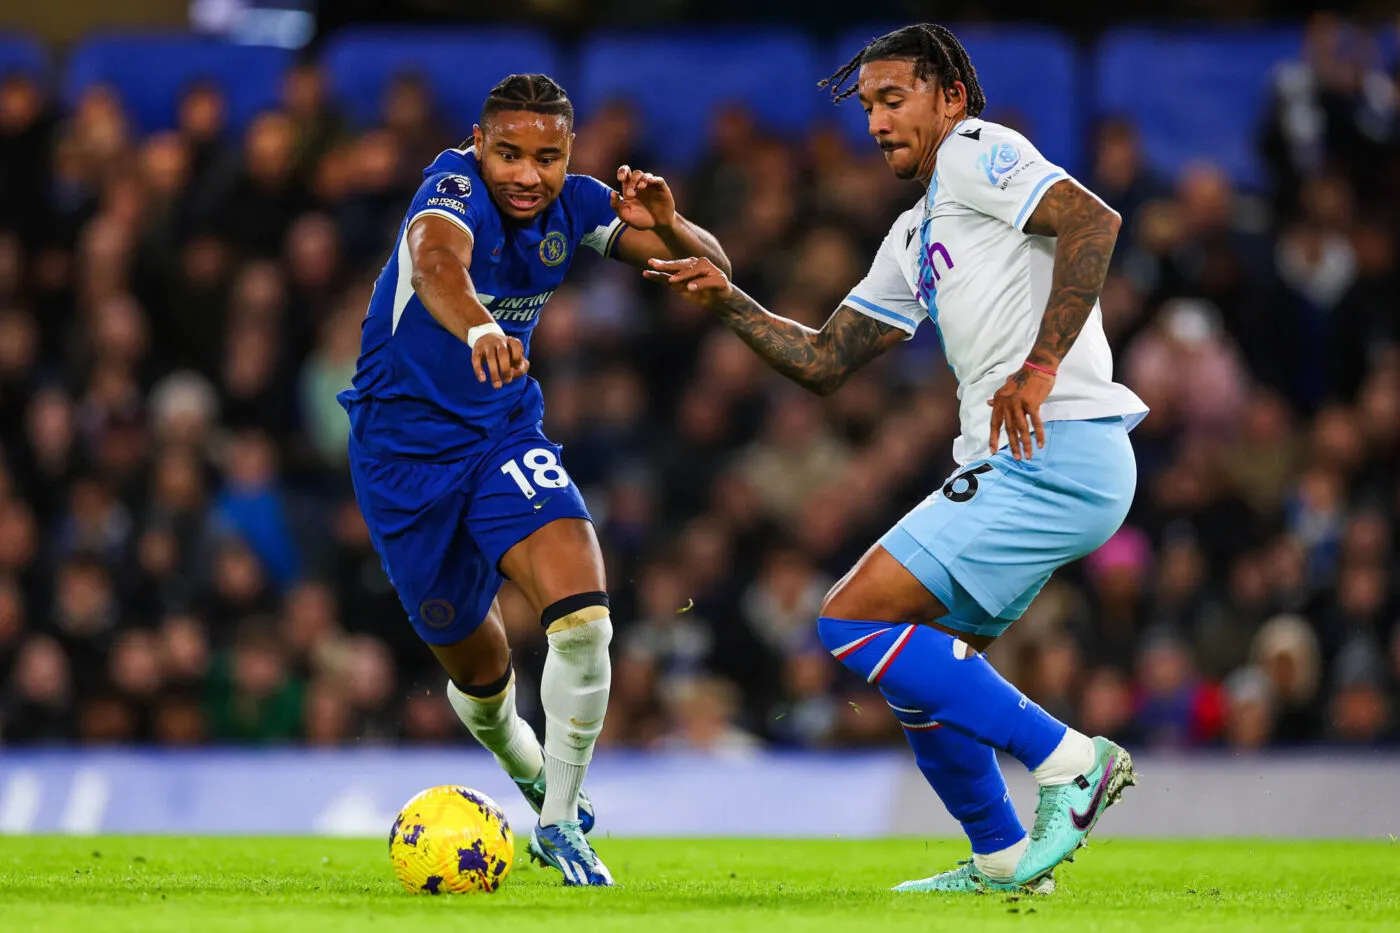 27th December 2023; Stamford Bridge, Chelsea, London, England: Premier League Football, Chelsea versus Crystal Palace; Christopher Nkunku of Chelsea takes on Chris Richards of Crystal Palace - Photo by Icon sport